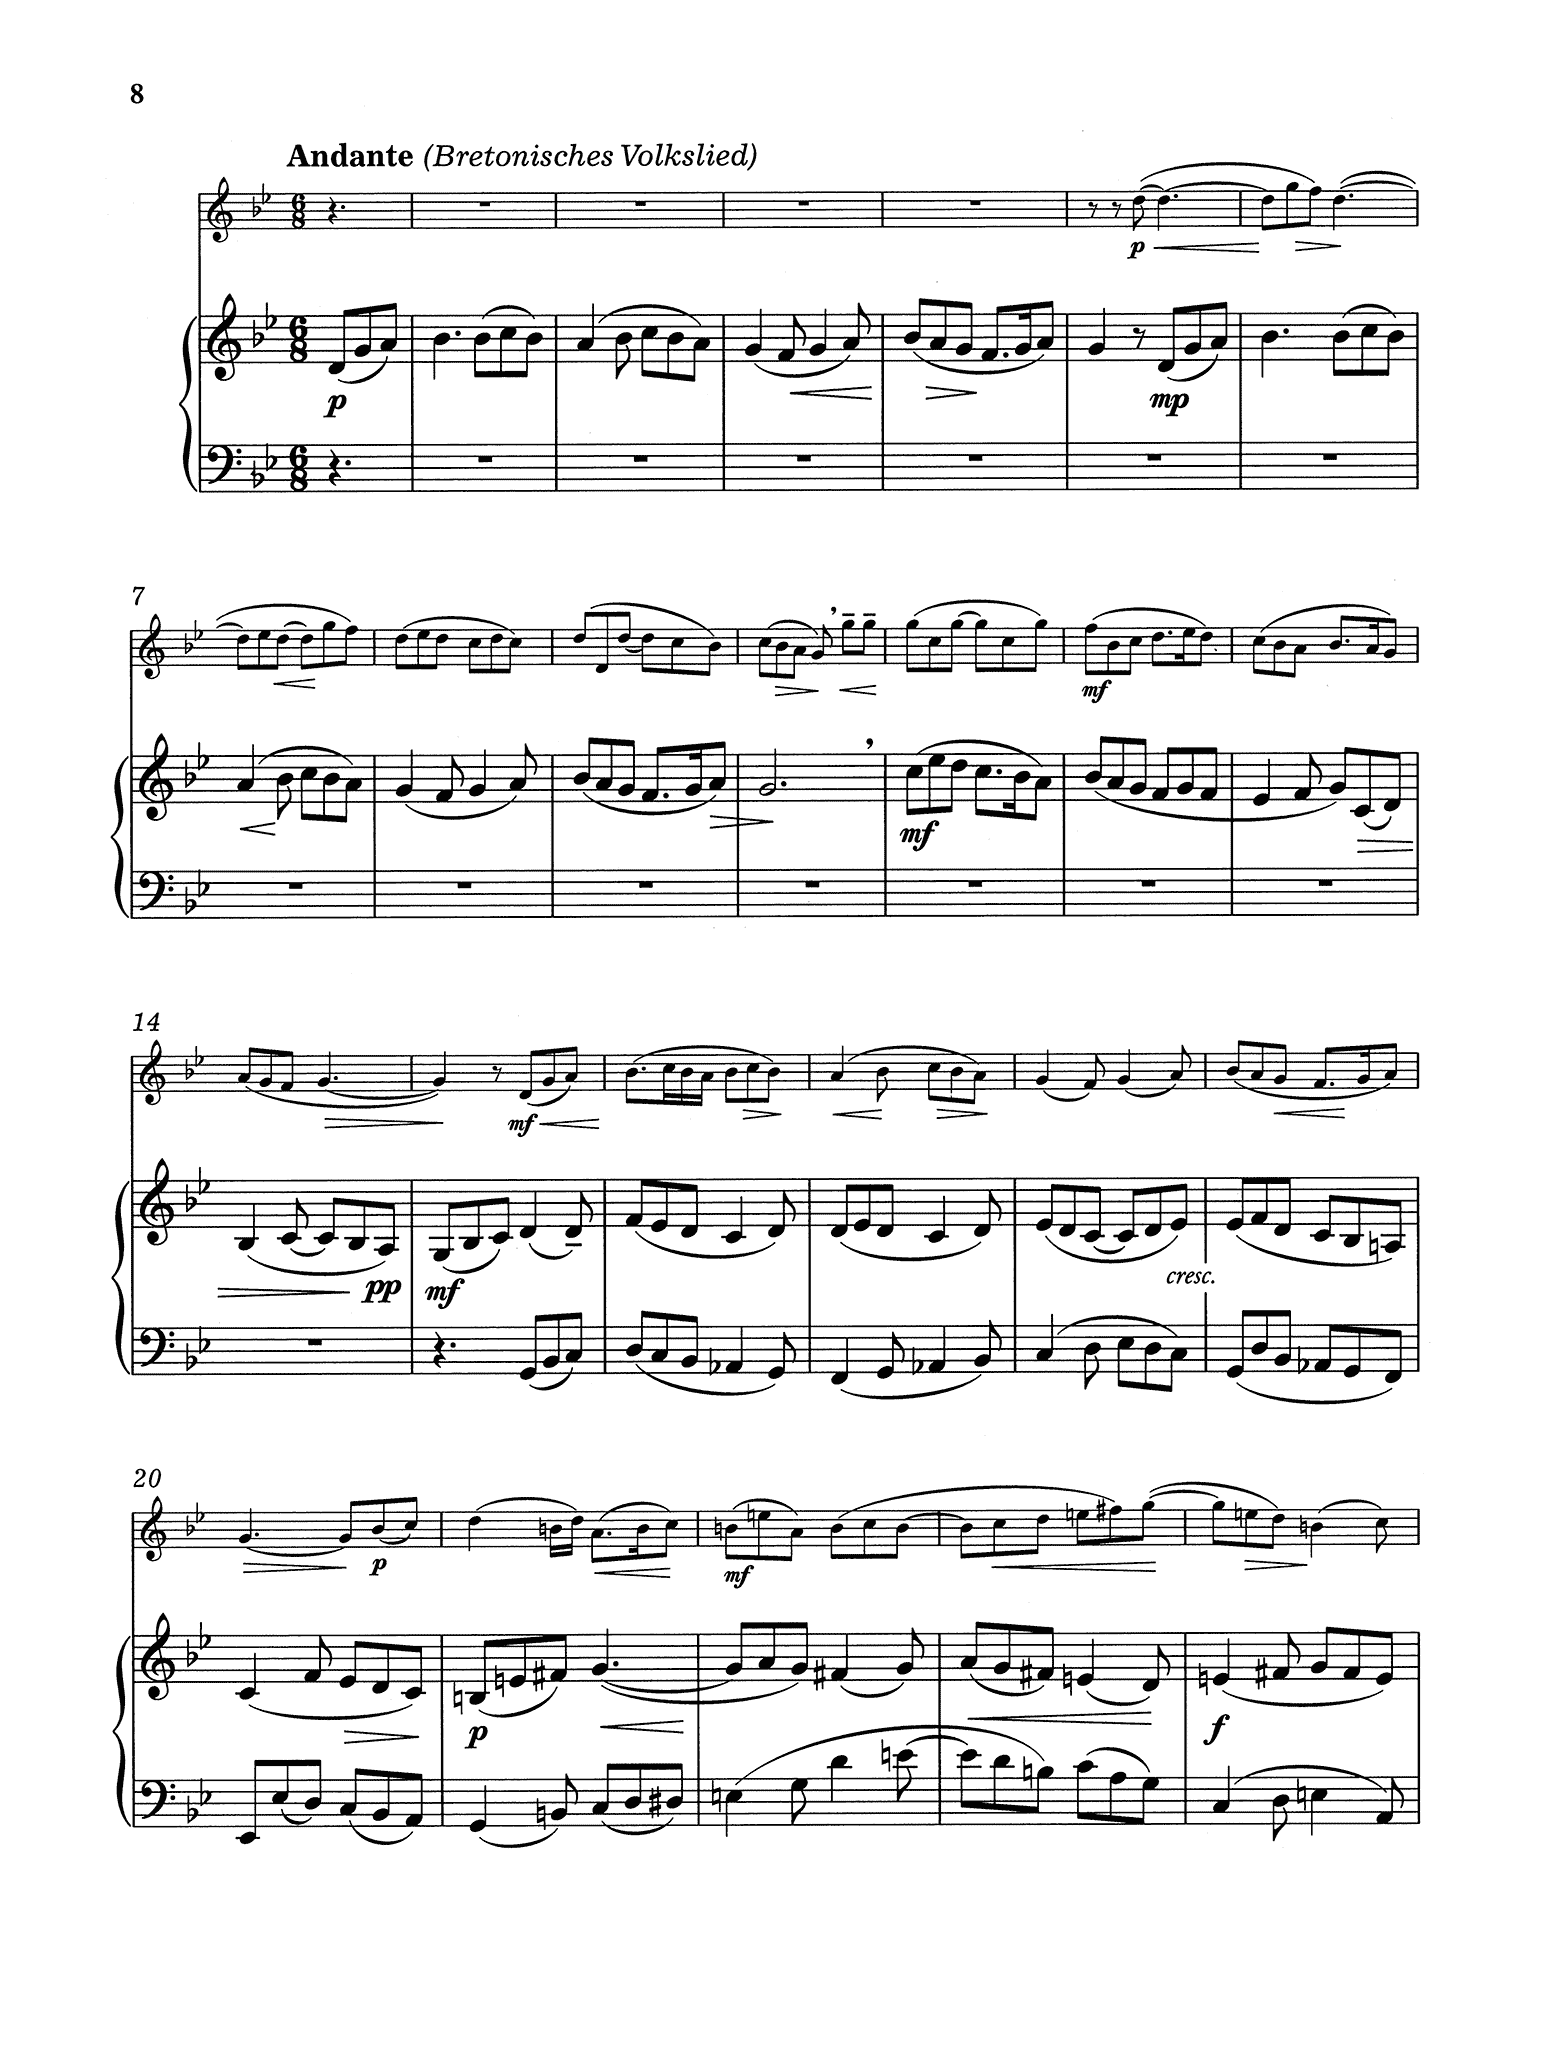 René Armbruster Sonatine clarinet and piano - Movement 2